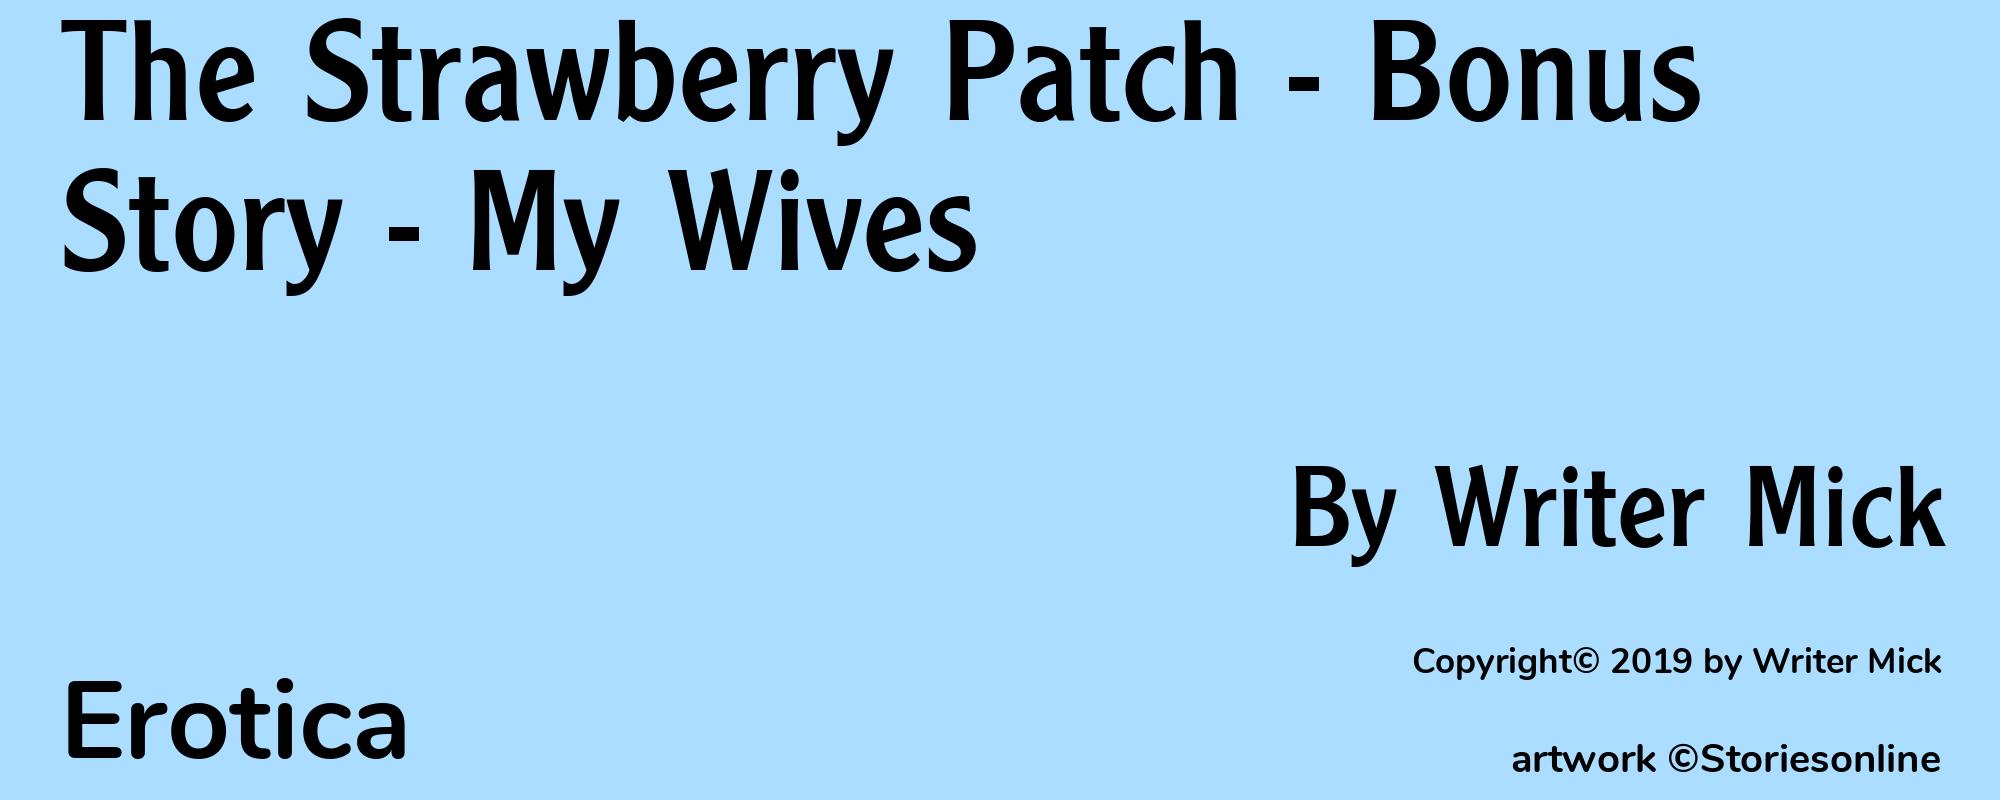 The Strawberry Patch - Bonus Story - My Wives - Cover